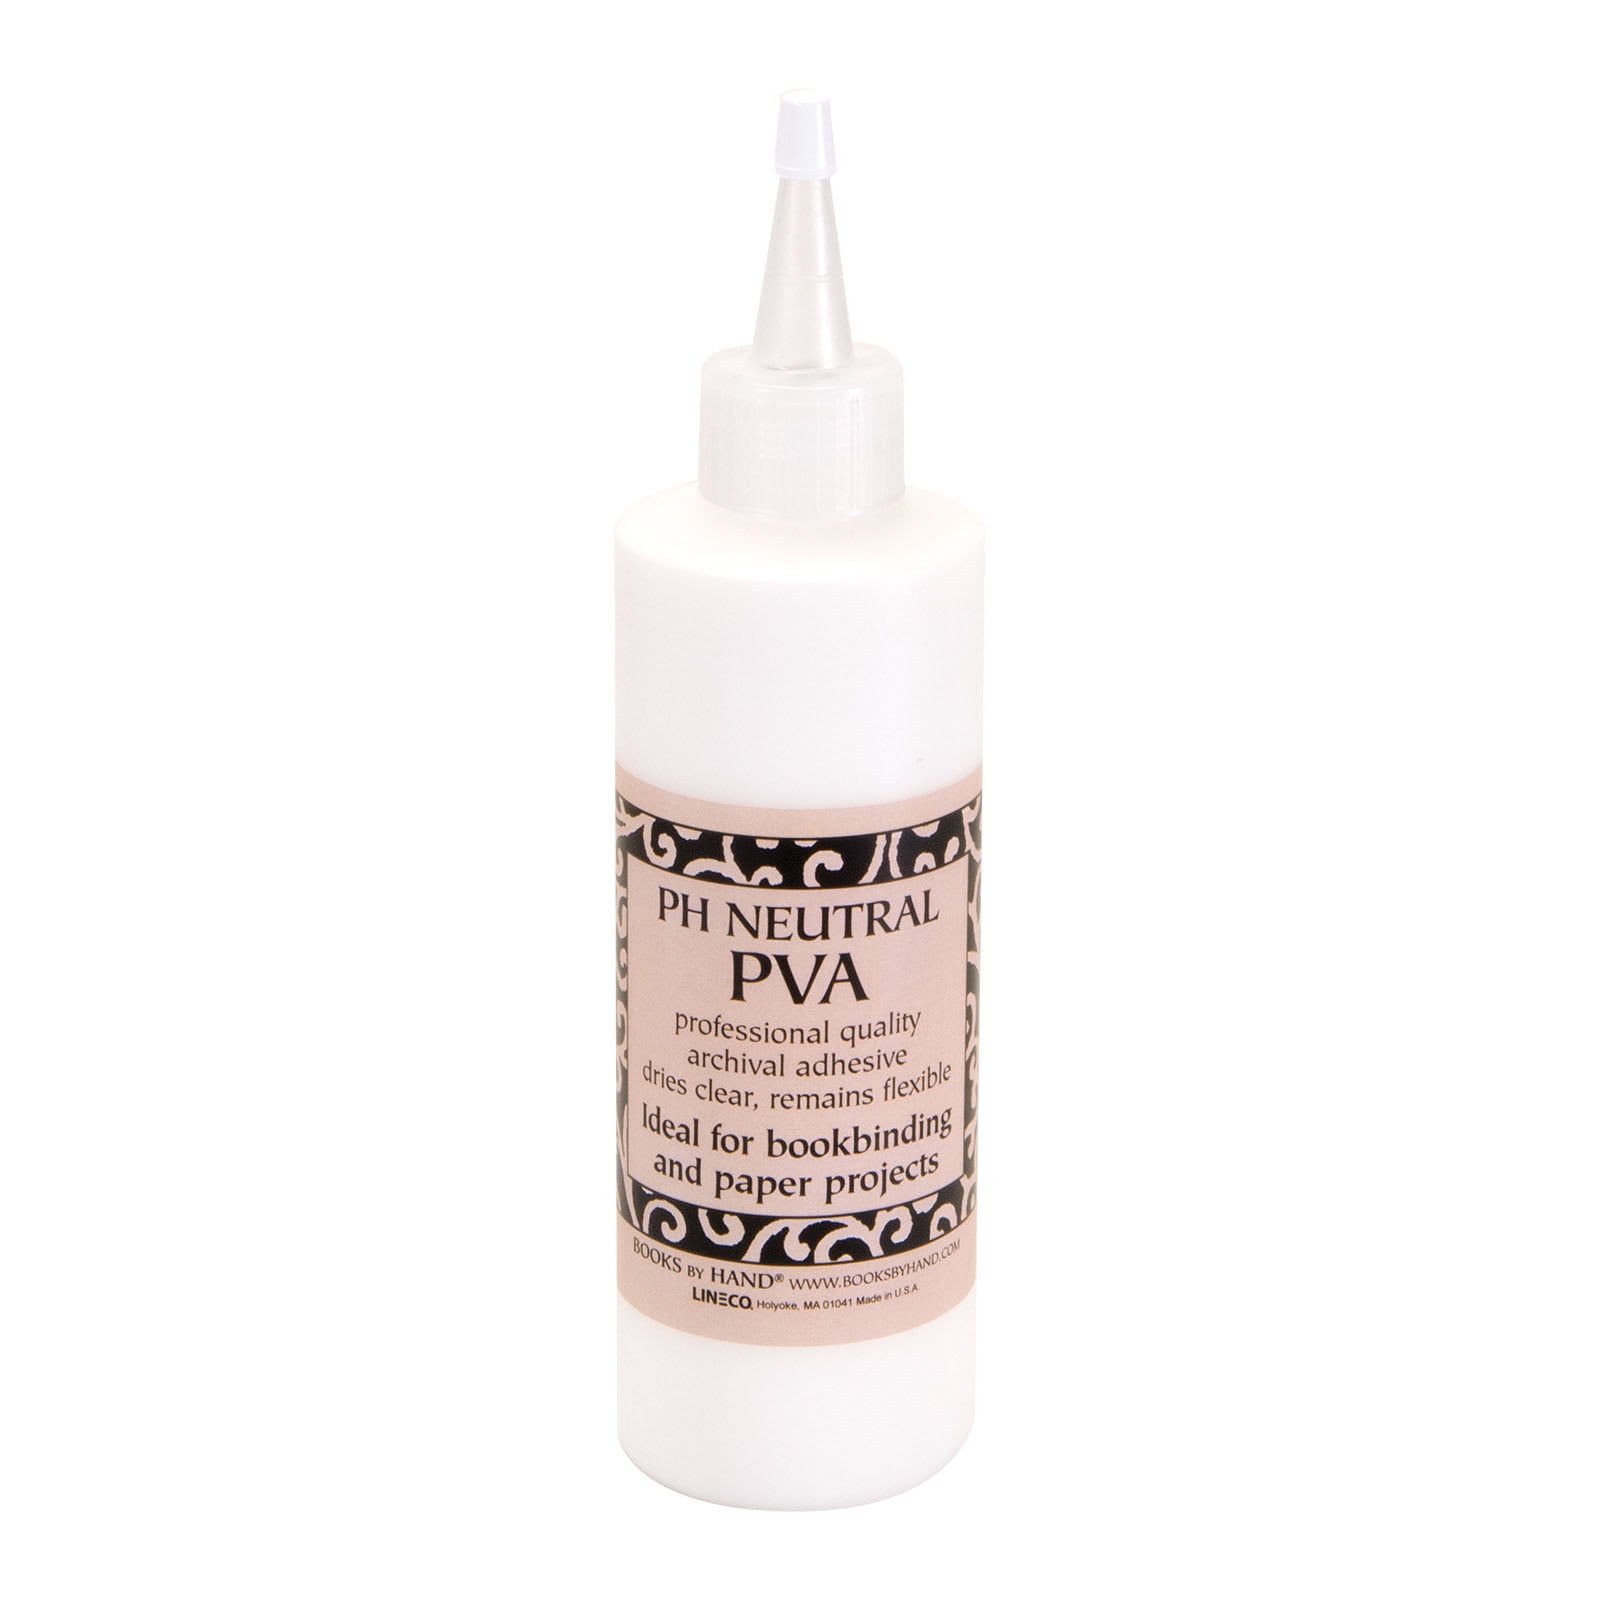  Books By Hand, PH Neutral PVA Adhesive, Professional Adhesive,  Dries Clear, Remains Flexible - 4 Ounce : Arts, Crafts & Sewing